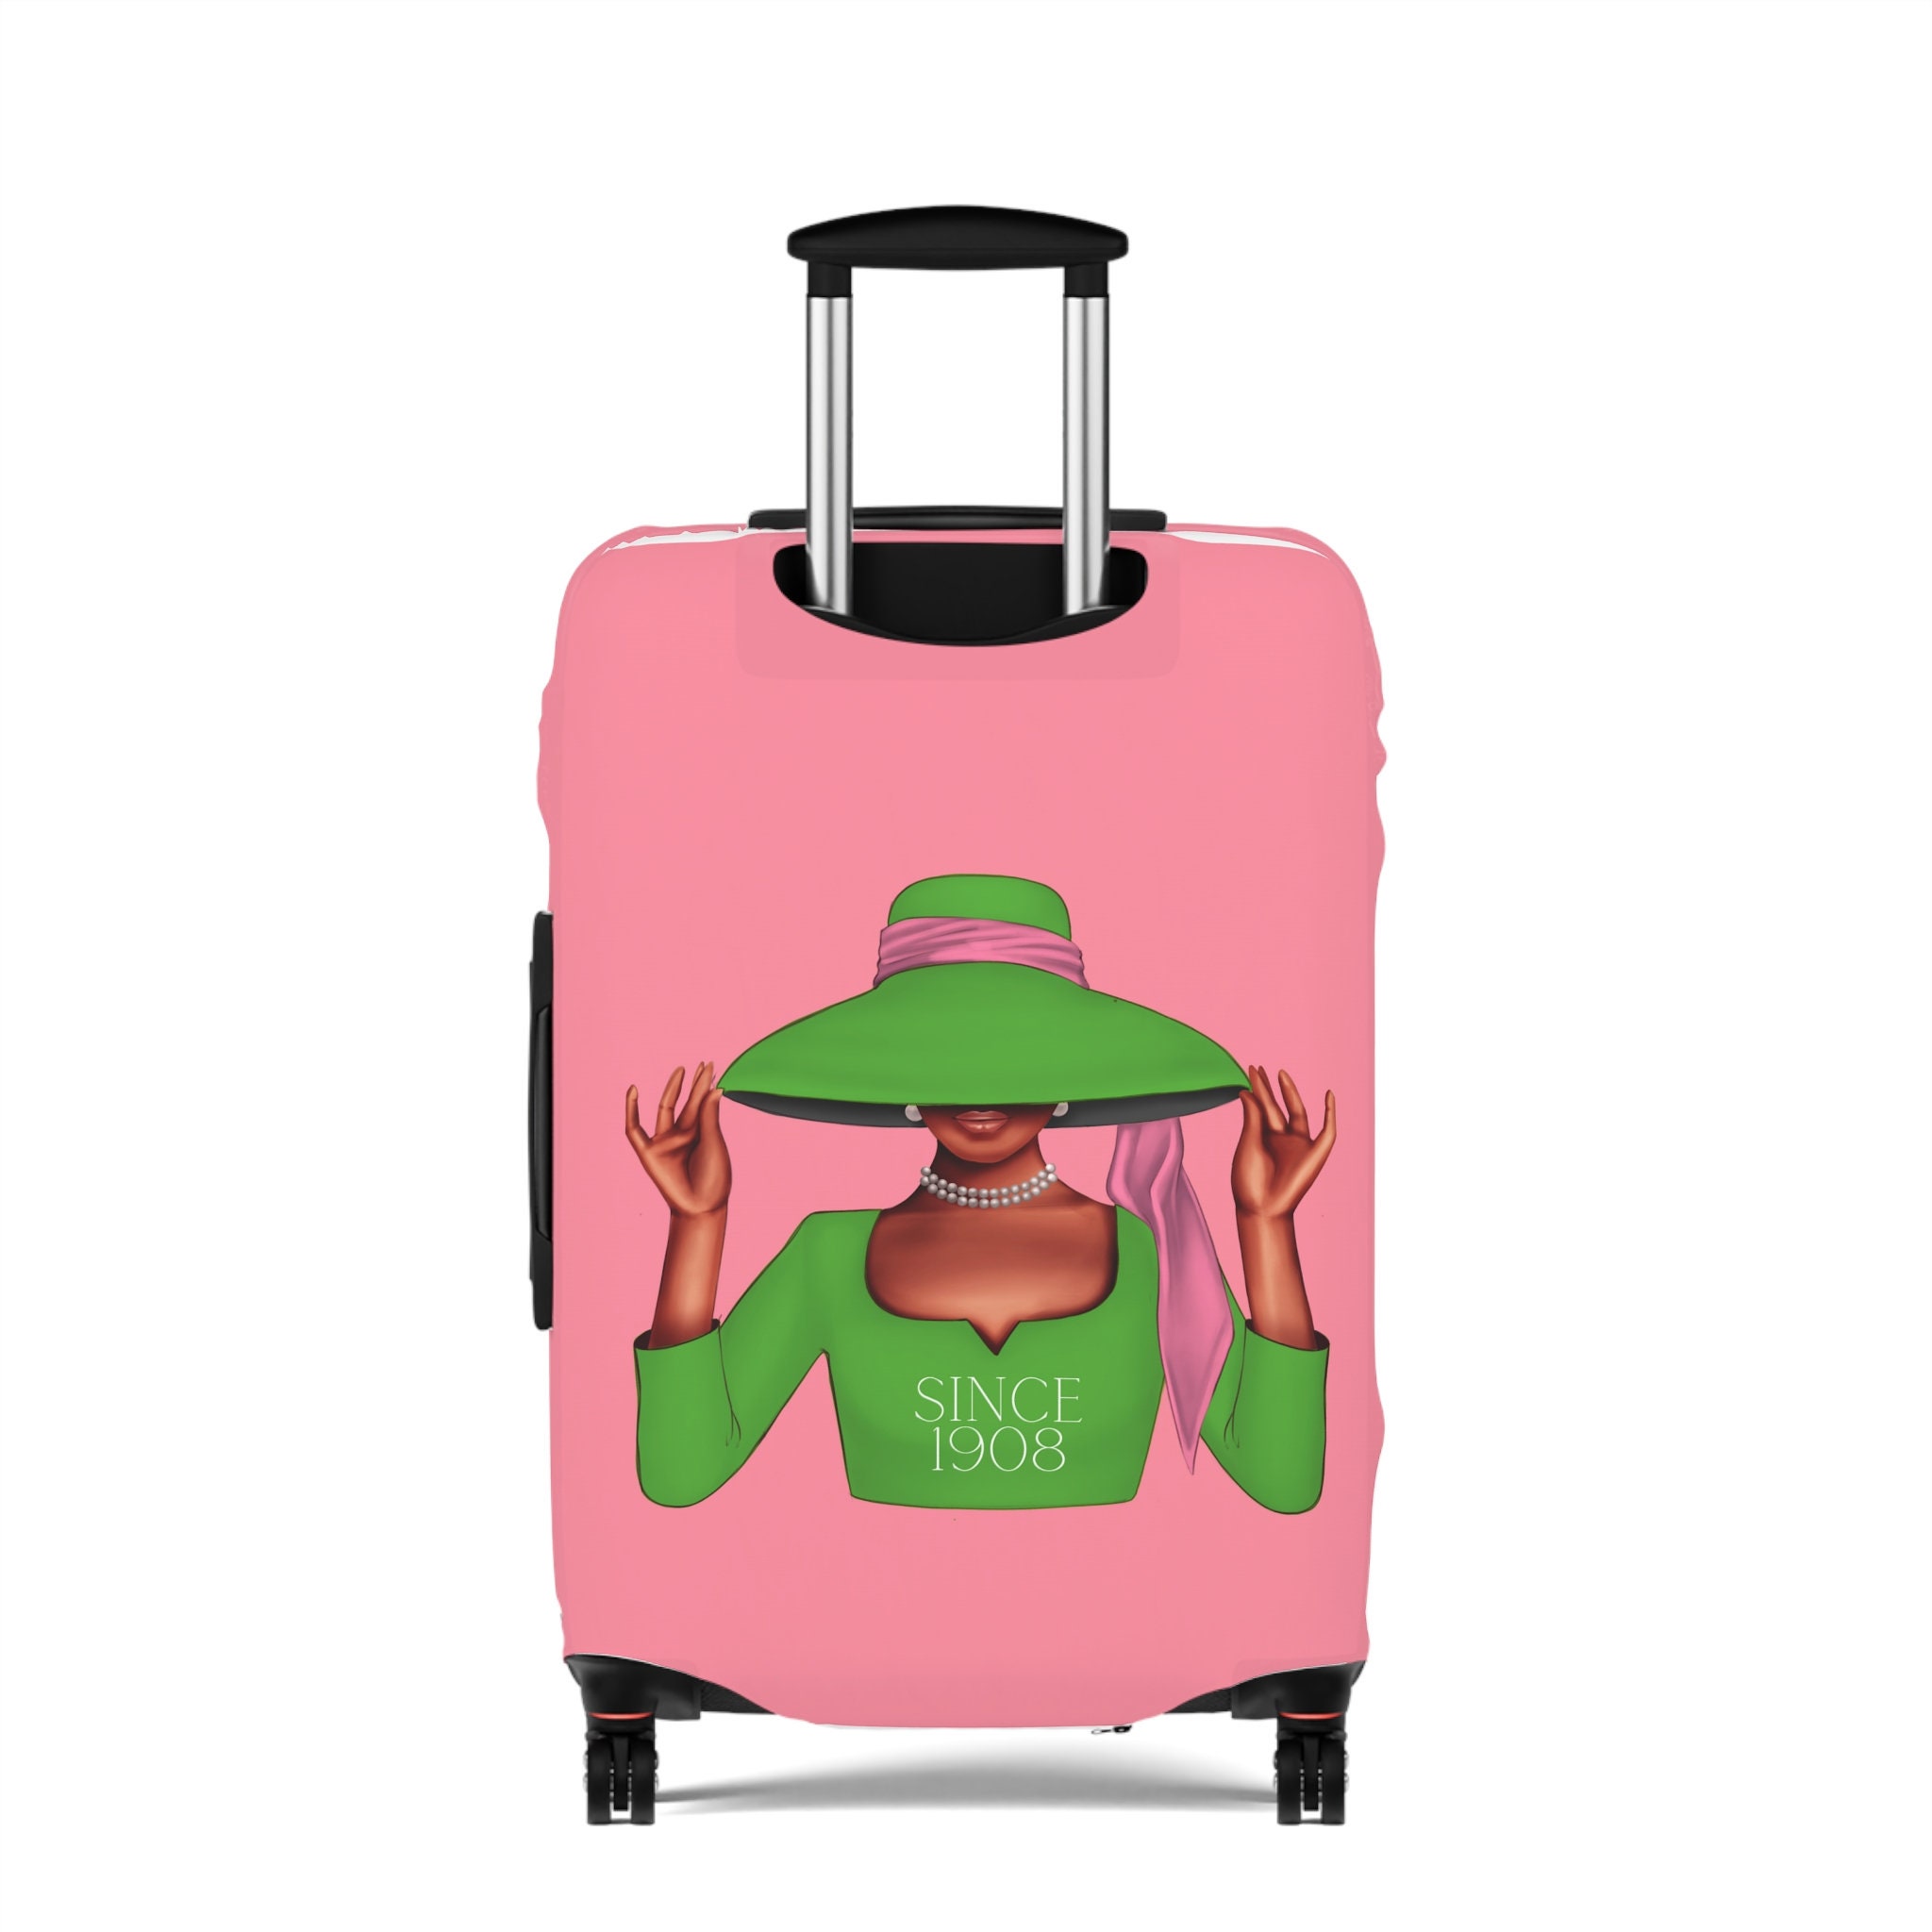 Since 1908 Salmon Pink Luggage Cover, AKA Inspired Luggage Cover